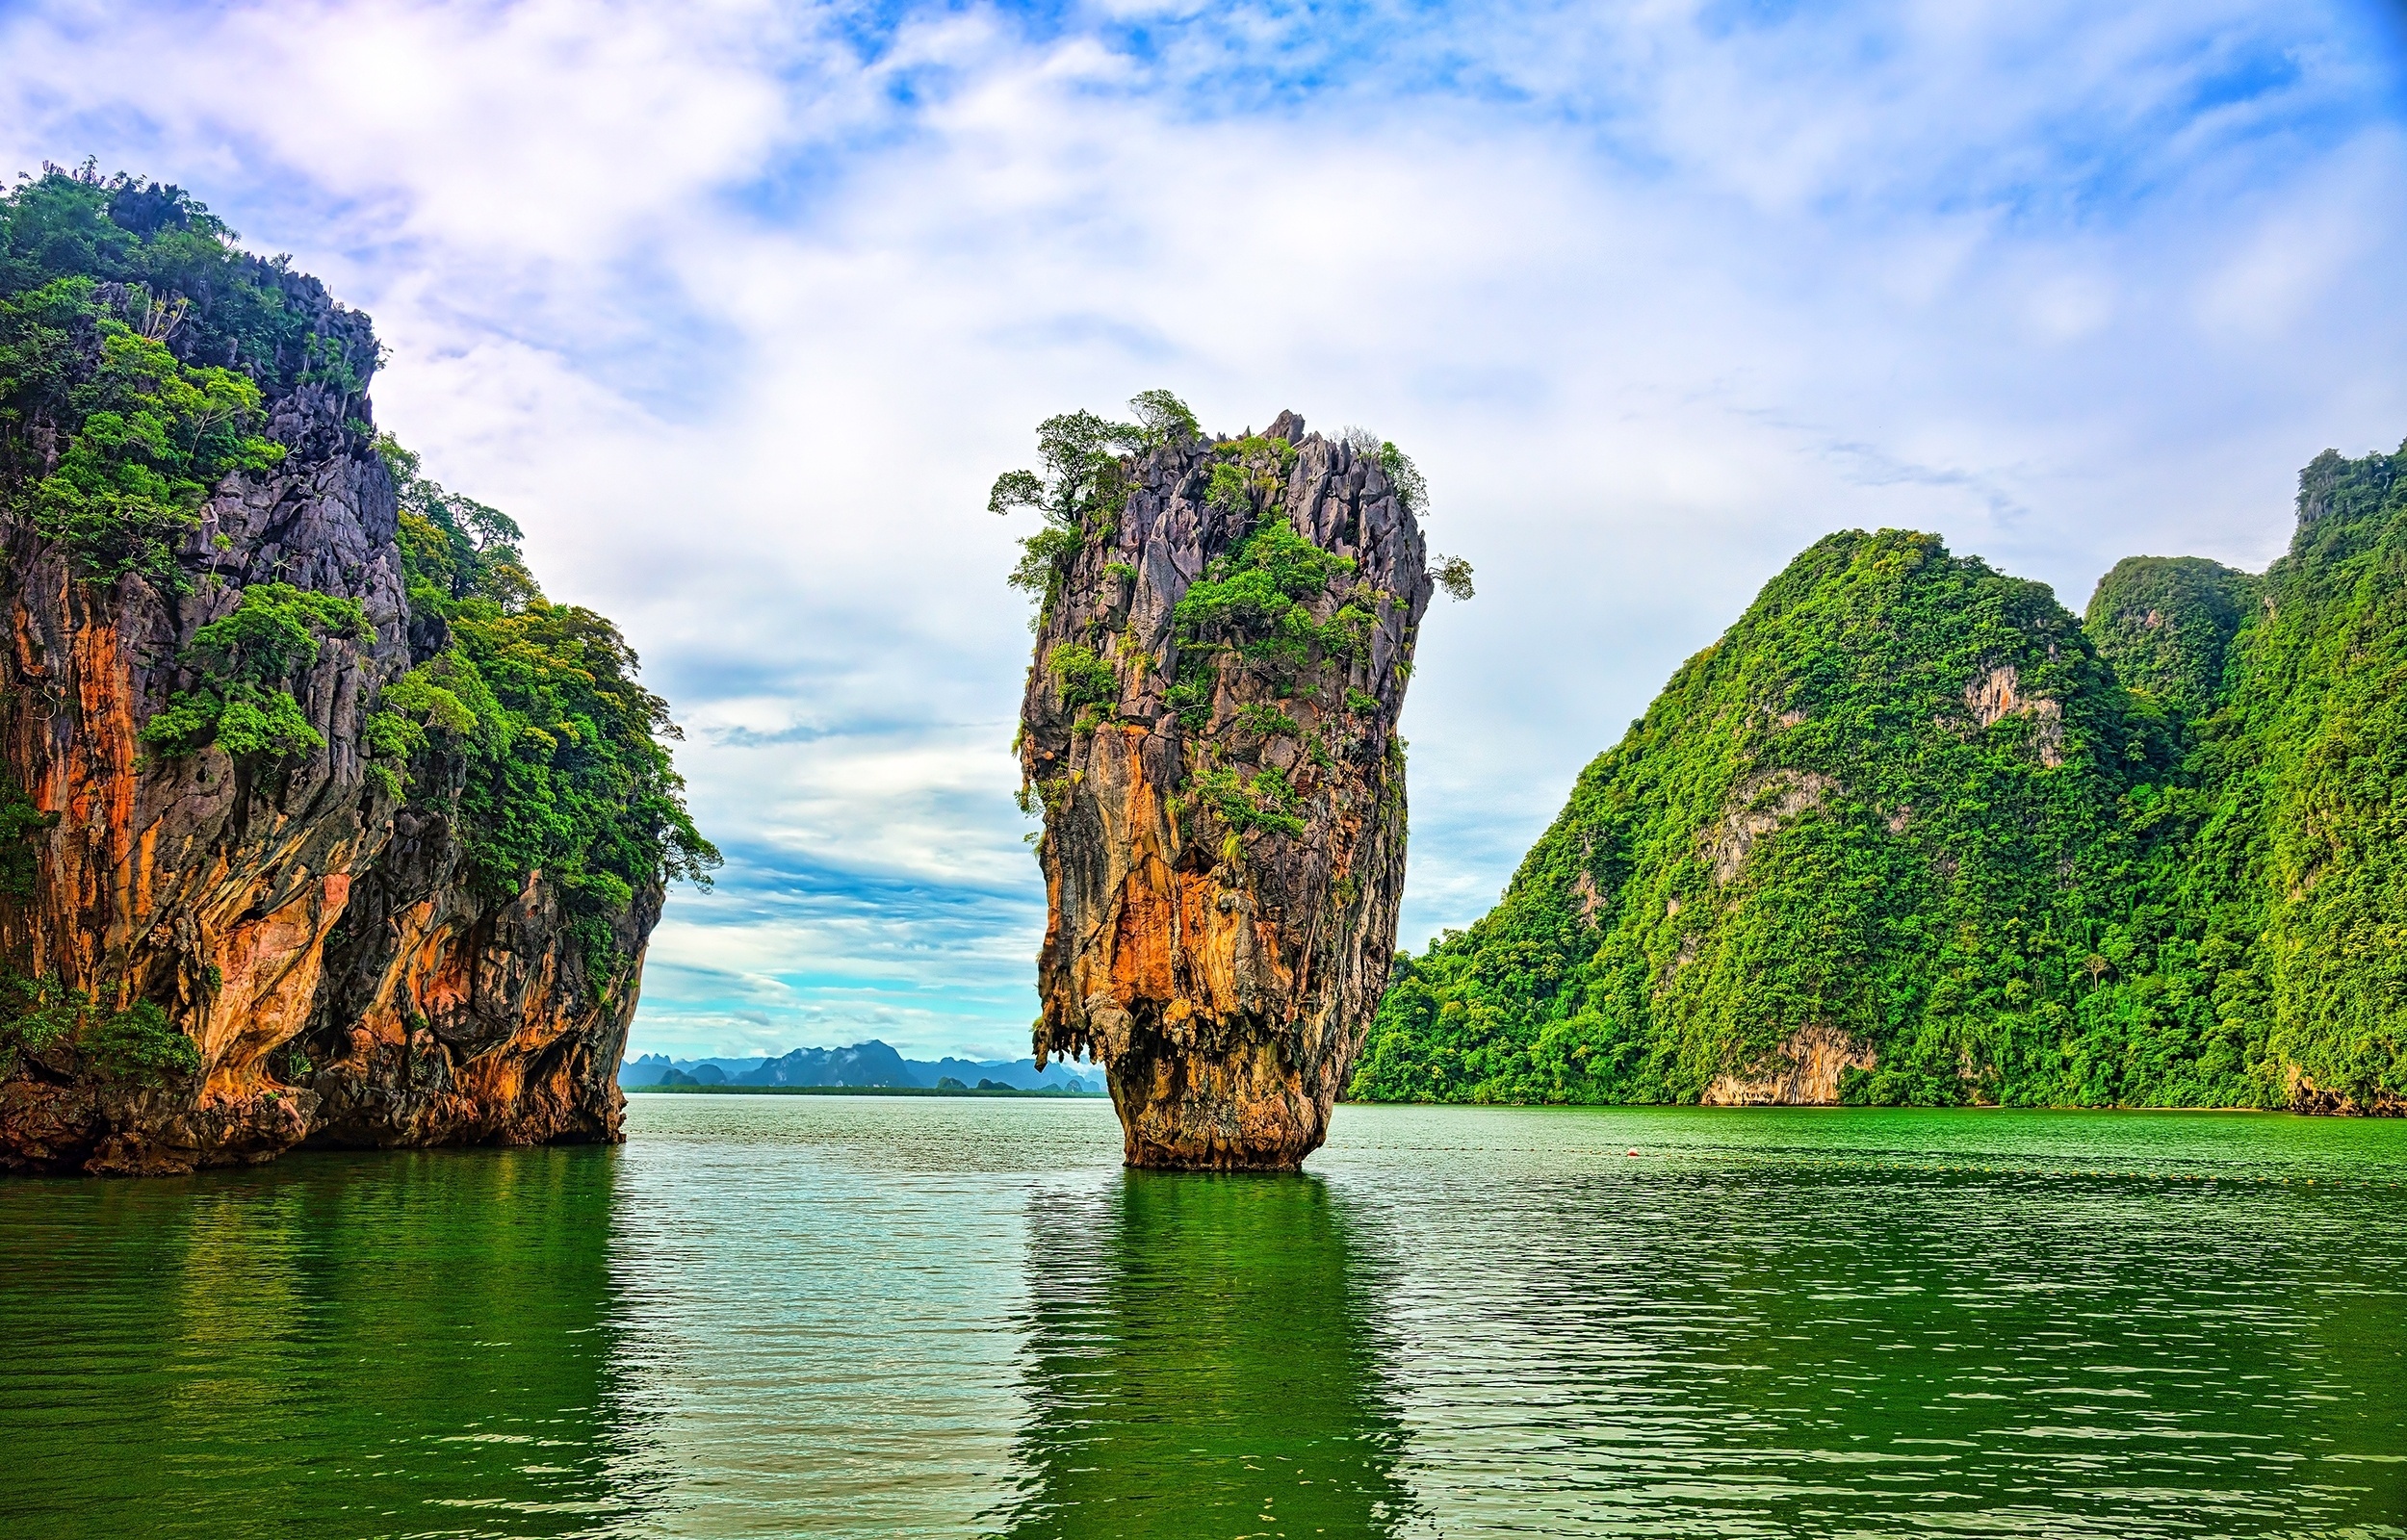 <p>Thailand is full of stunning islands, and it’s too difficult to recommend a single one for your winter escape. However, travelers' favorites are Koh Tao, Ko Lanta, and Koh Lipe.</p><p>You may also like: <a href='https://www.yardbarker.com/lifestyle/articles/25_fascinating_facts_about_your_favorite_burger_chains_022724/s1__24020836'>25 fascinating facts about your favorite burger chains</a></p>